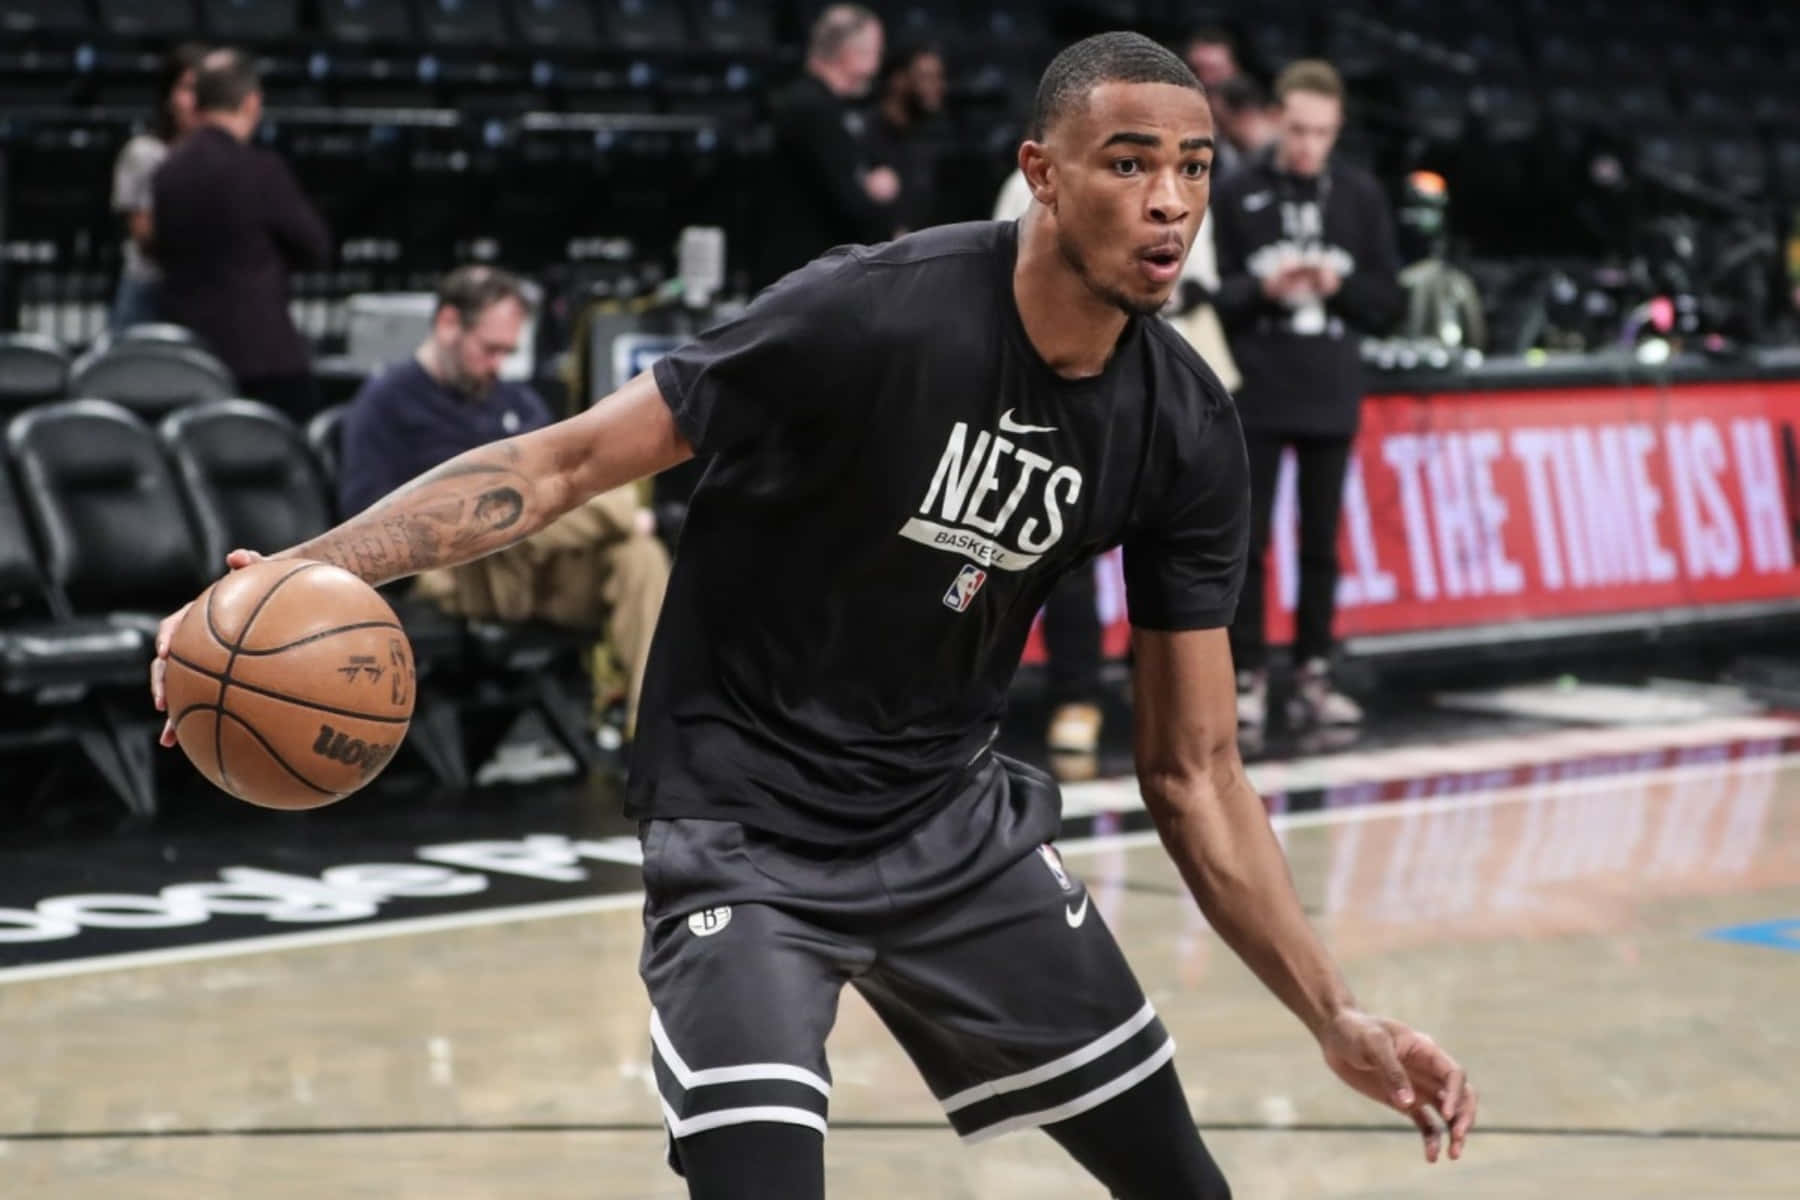 Brooklyn Nets Player Warmup Session Wallpaper